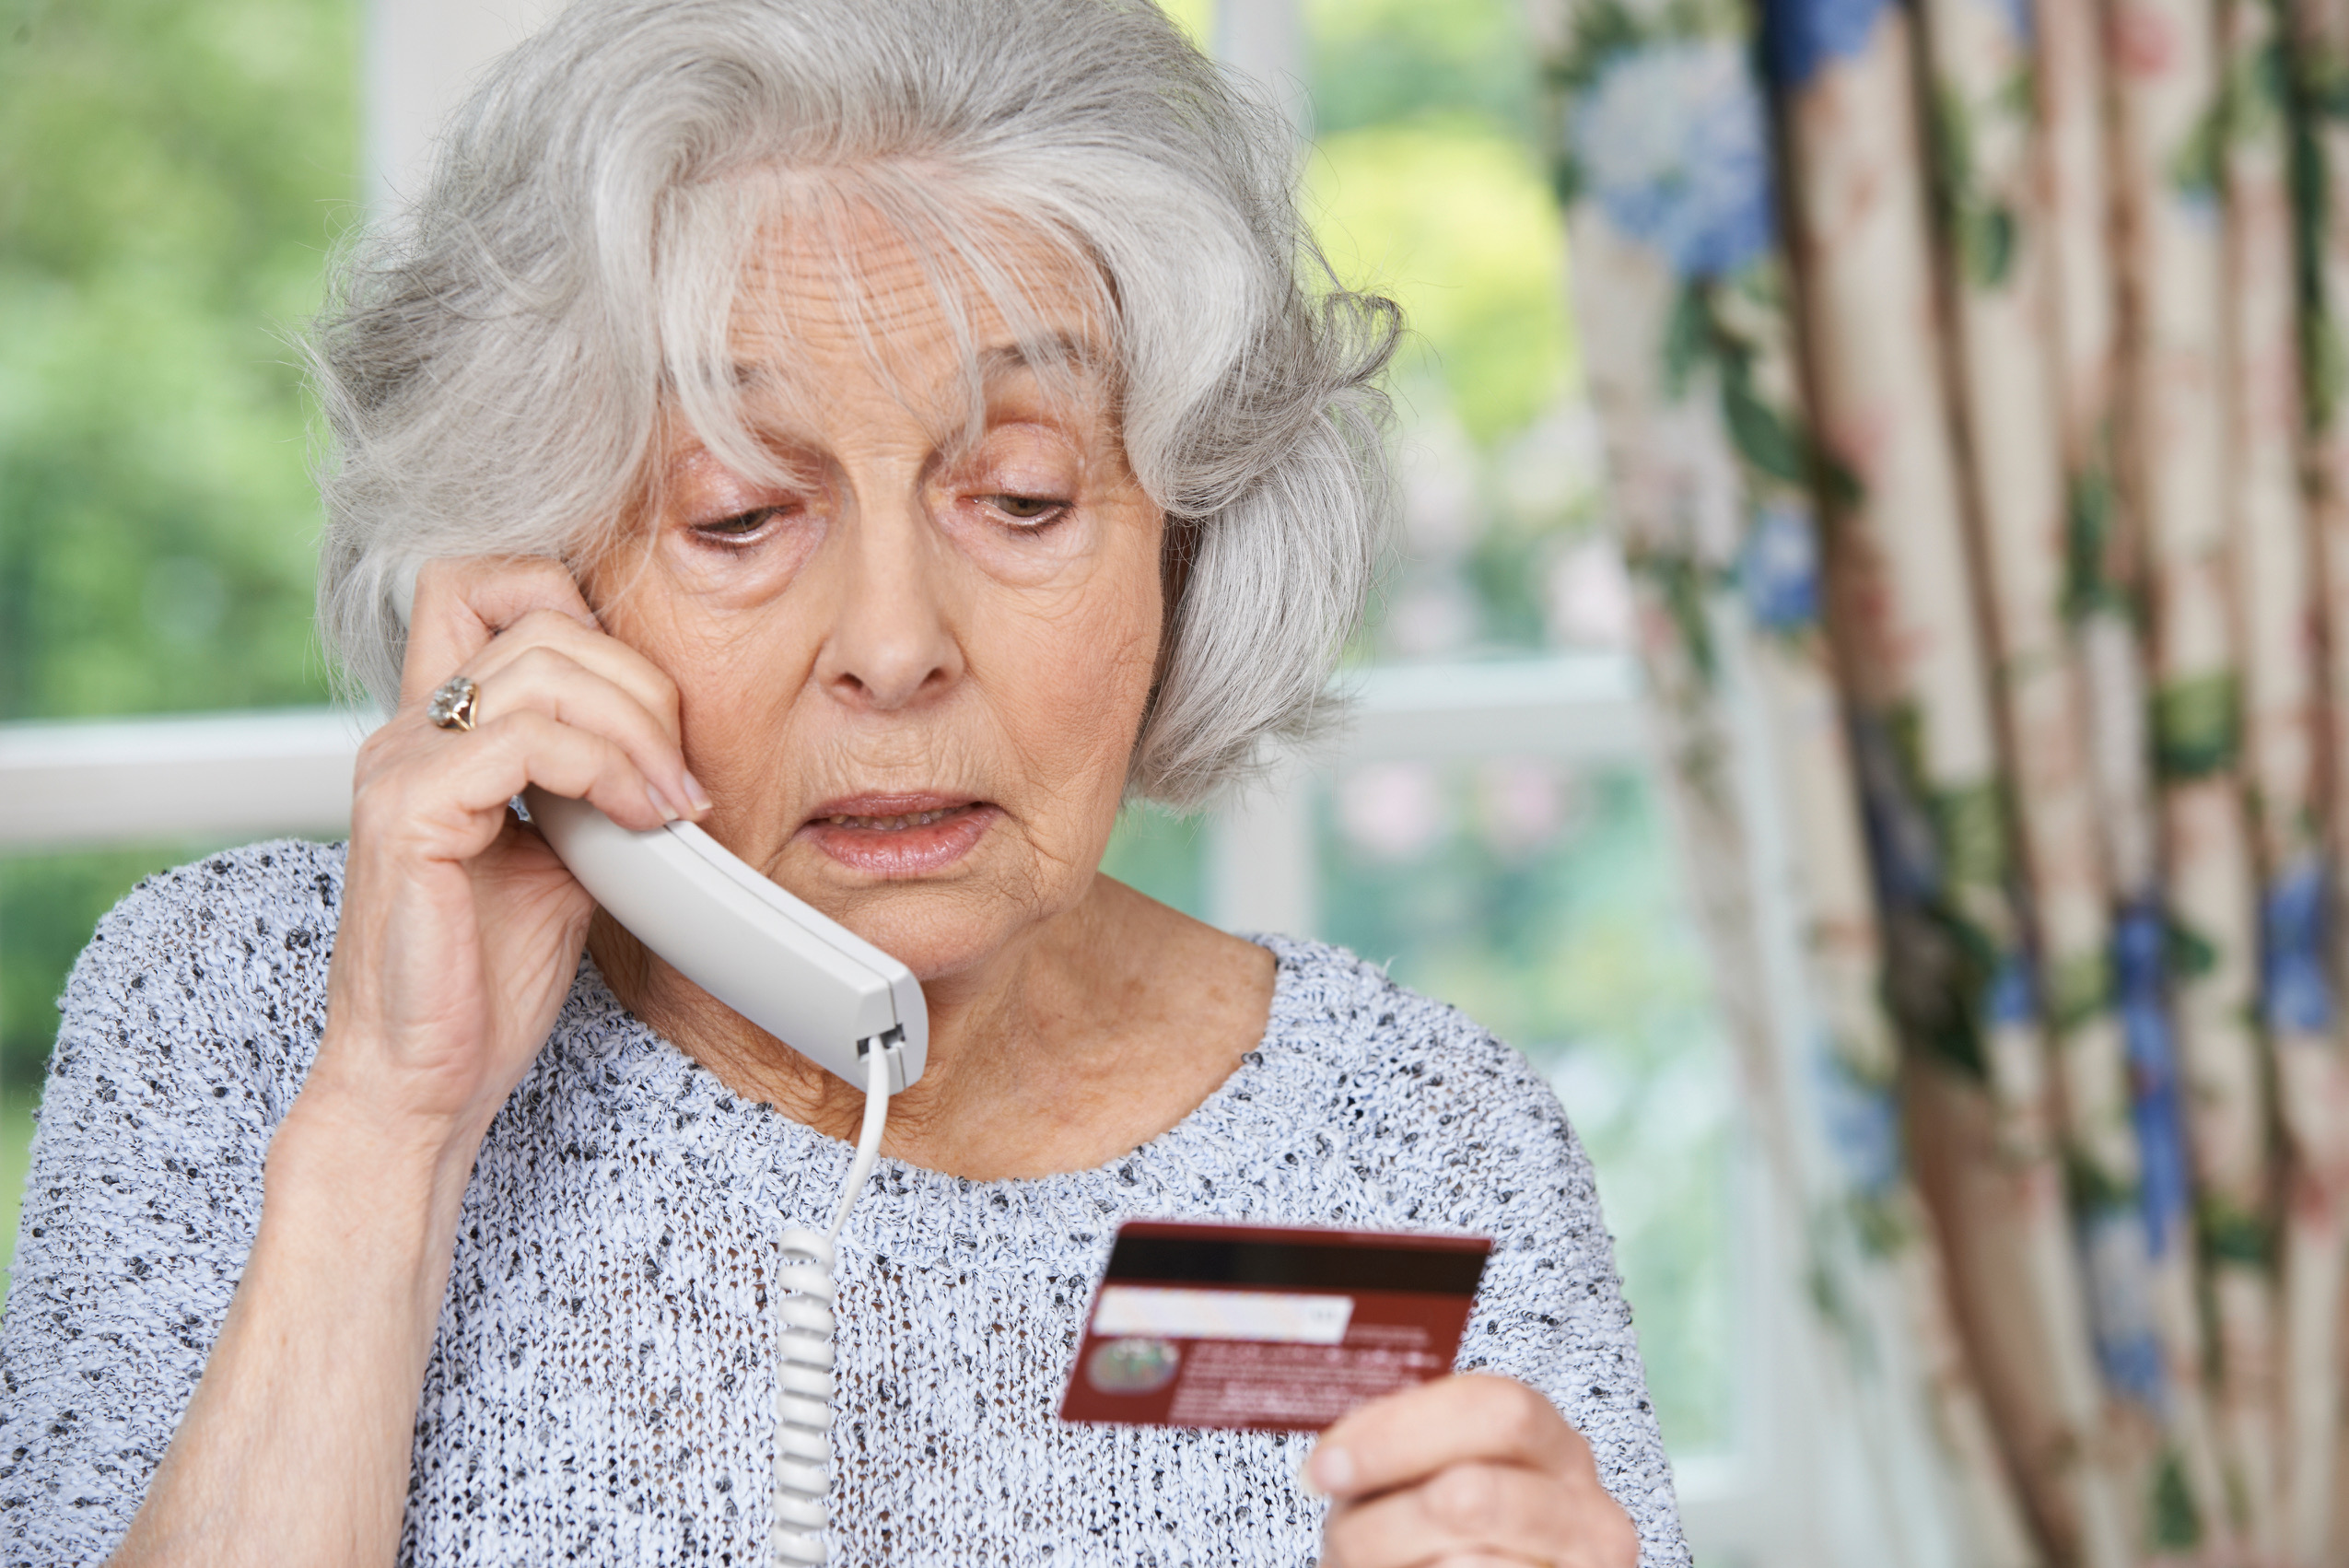 Senior woman giving credit card information over the phone.